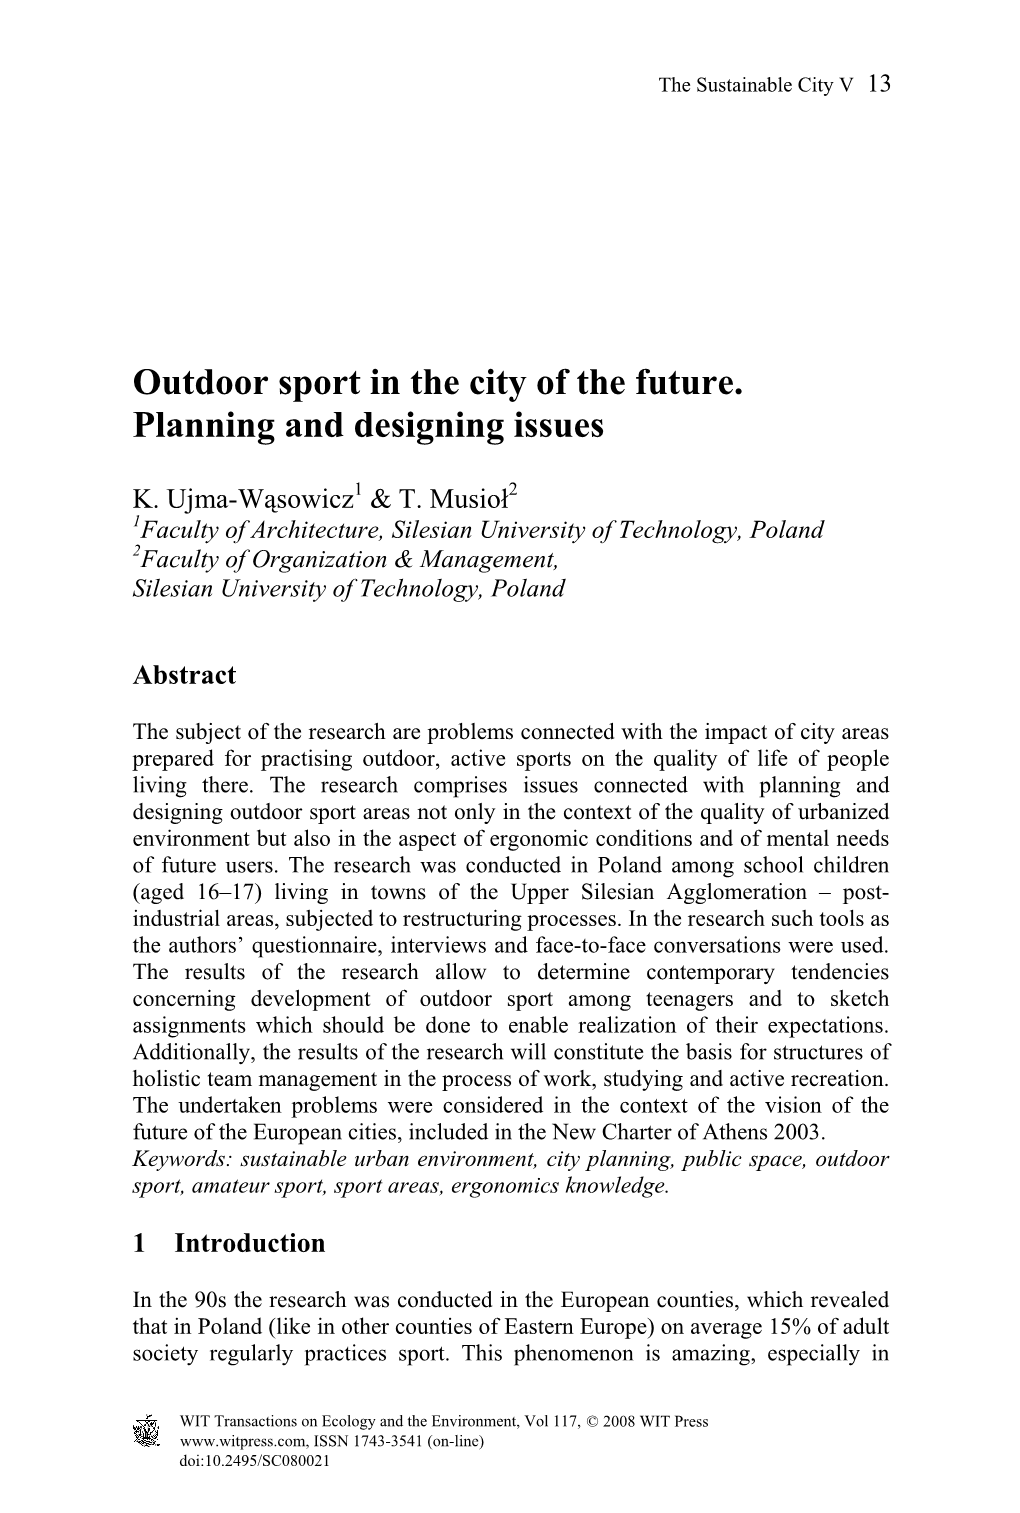 Outdoor Sport in the City of the Future. Planning and Designing Issues